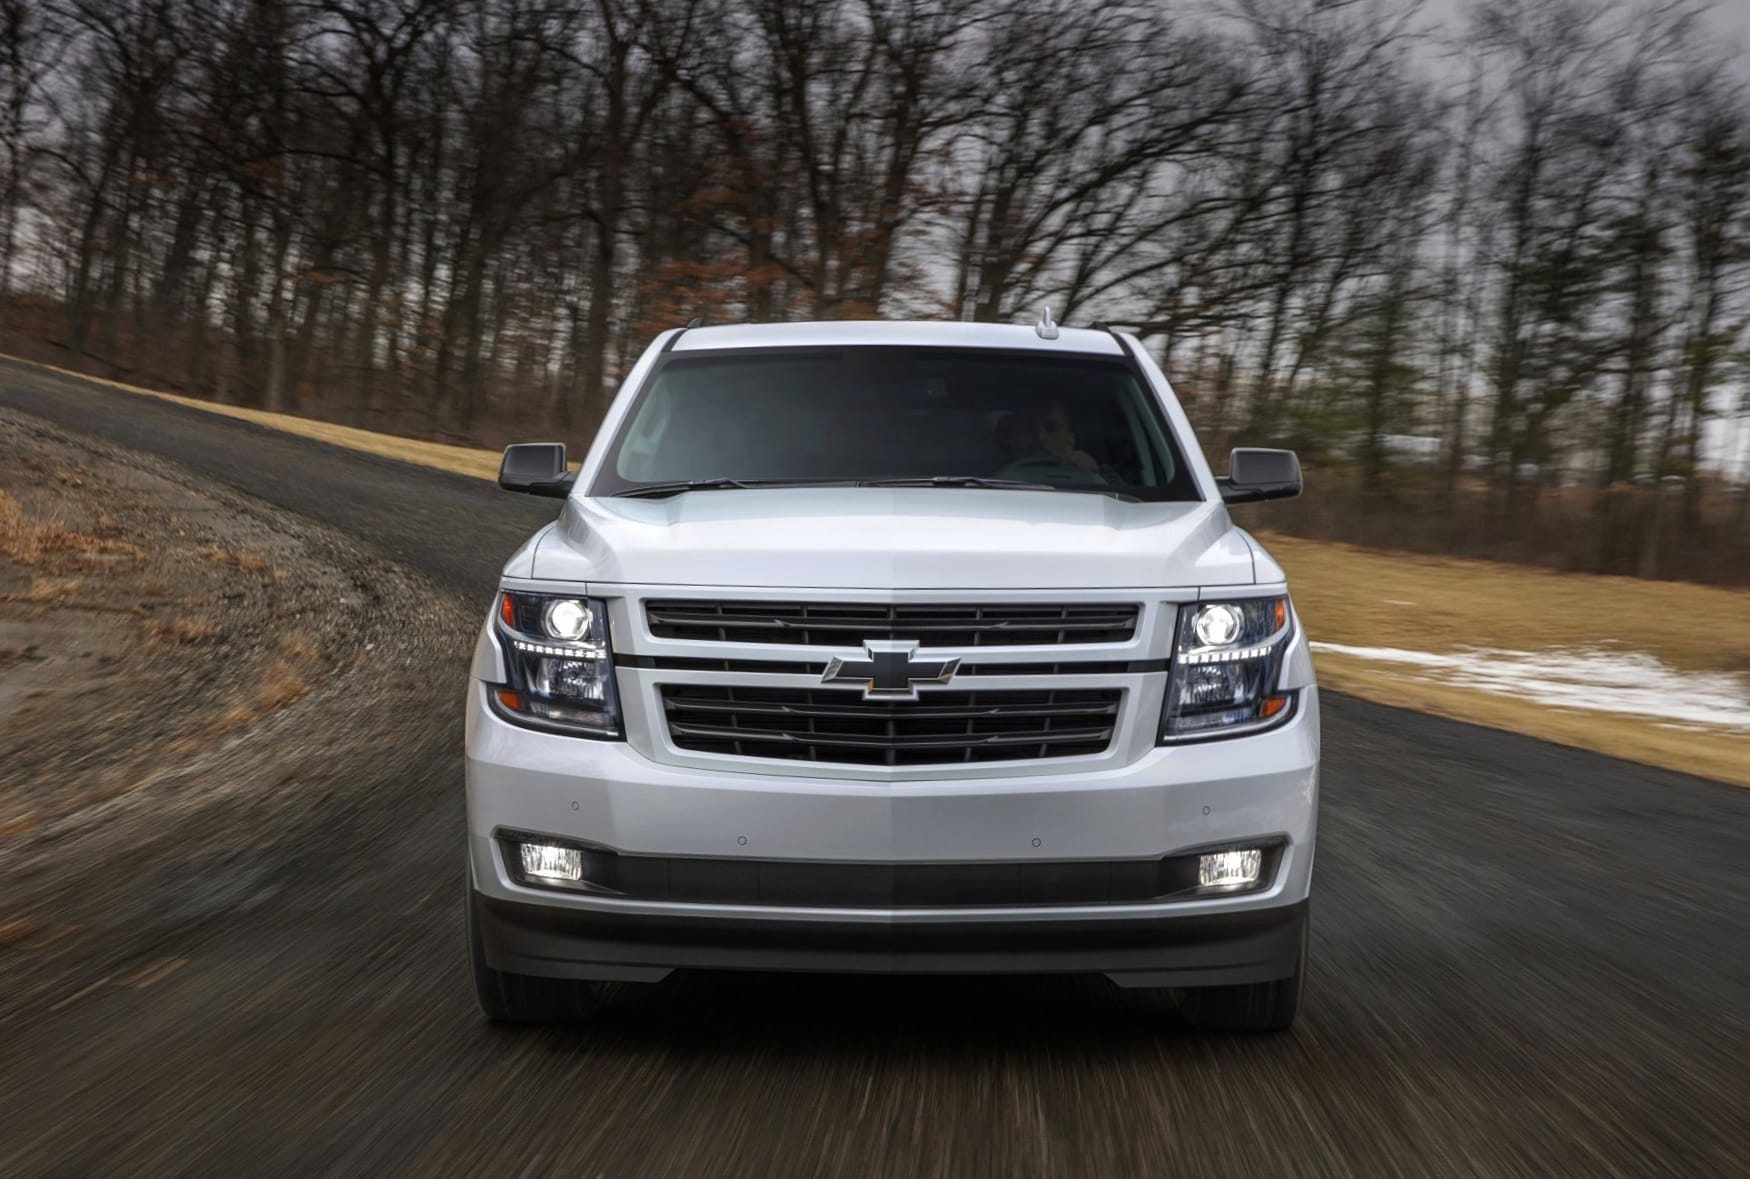 Chevrolet Tahoe wallpapers HD quality